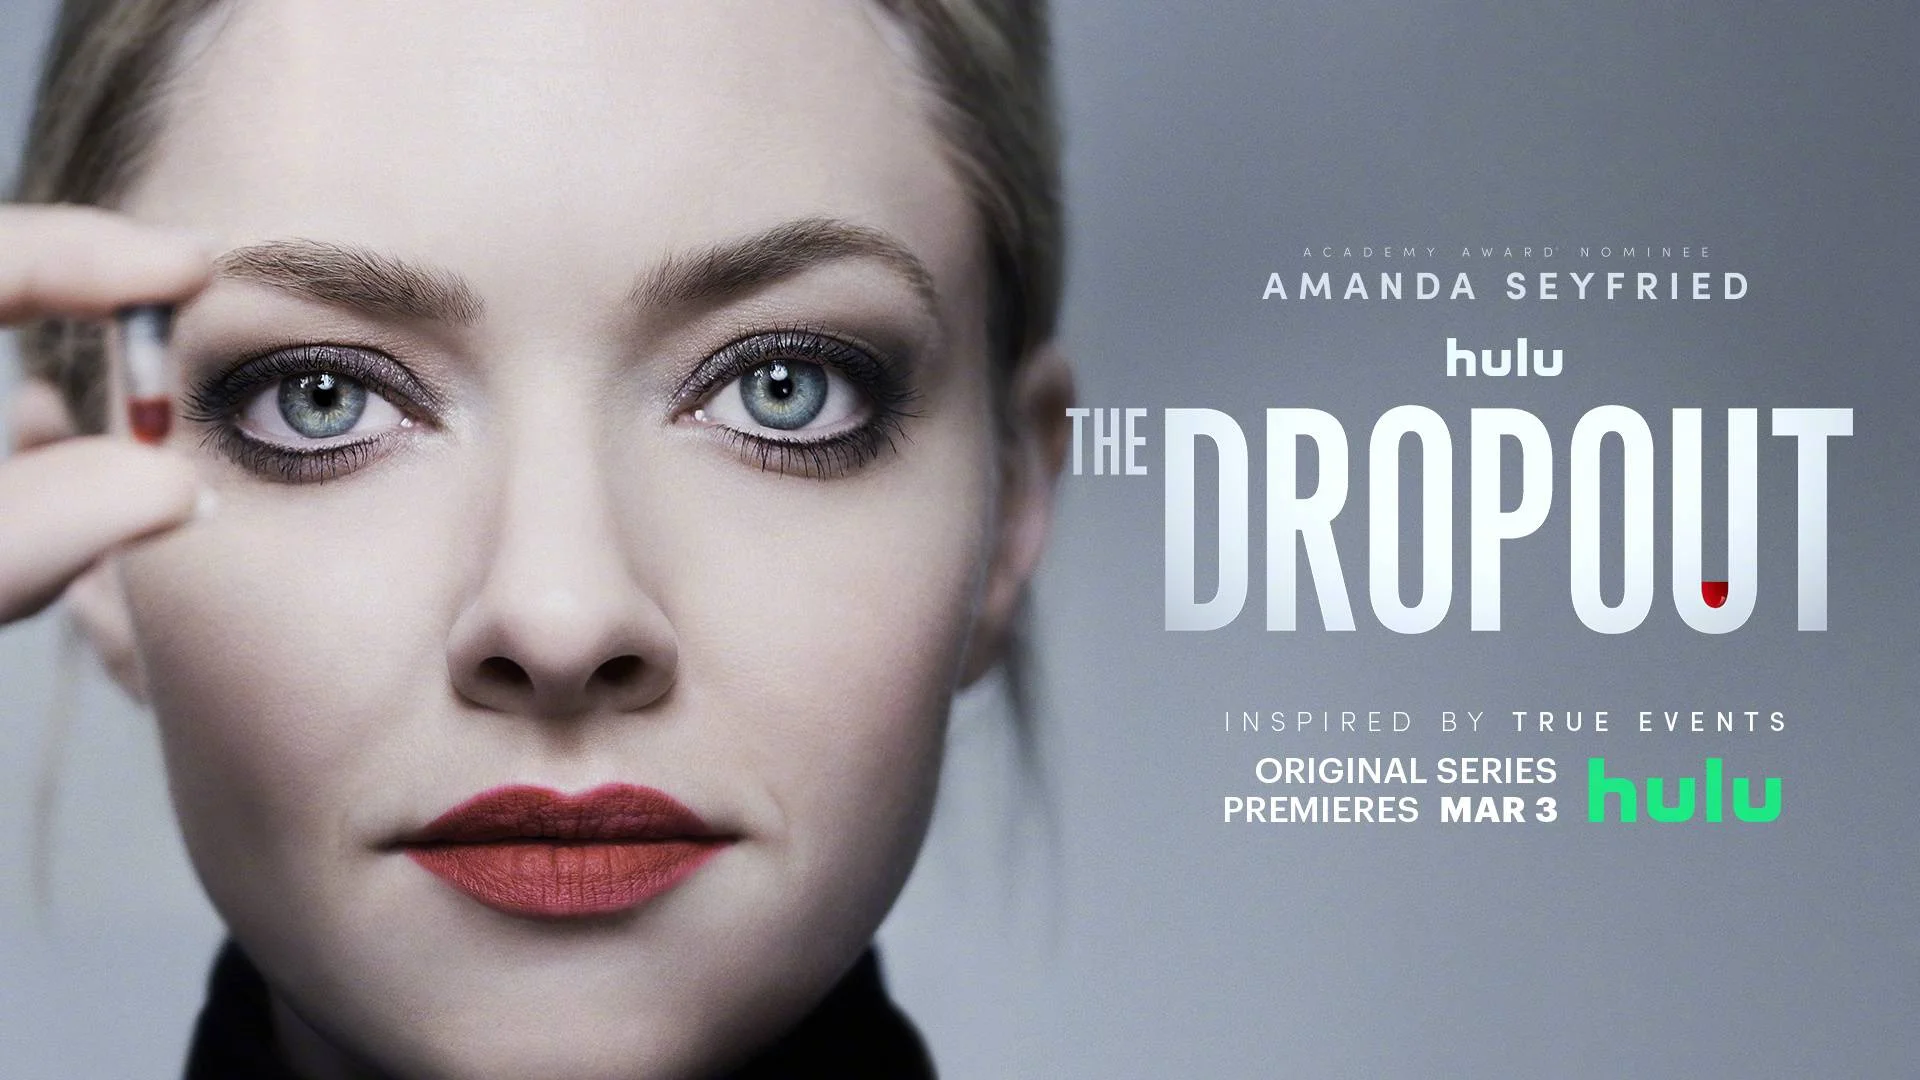 "The Dropout" brings more people to know how Elizabeth Holmes deceived so many people